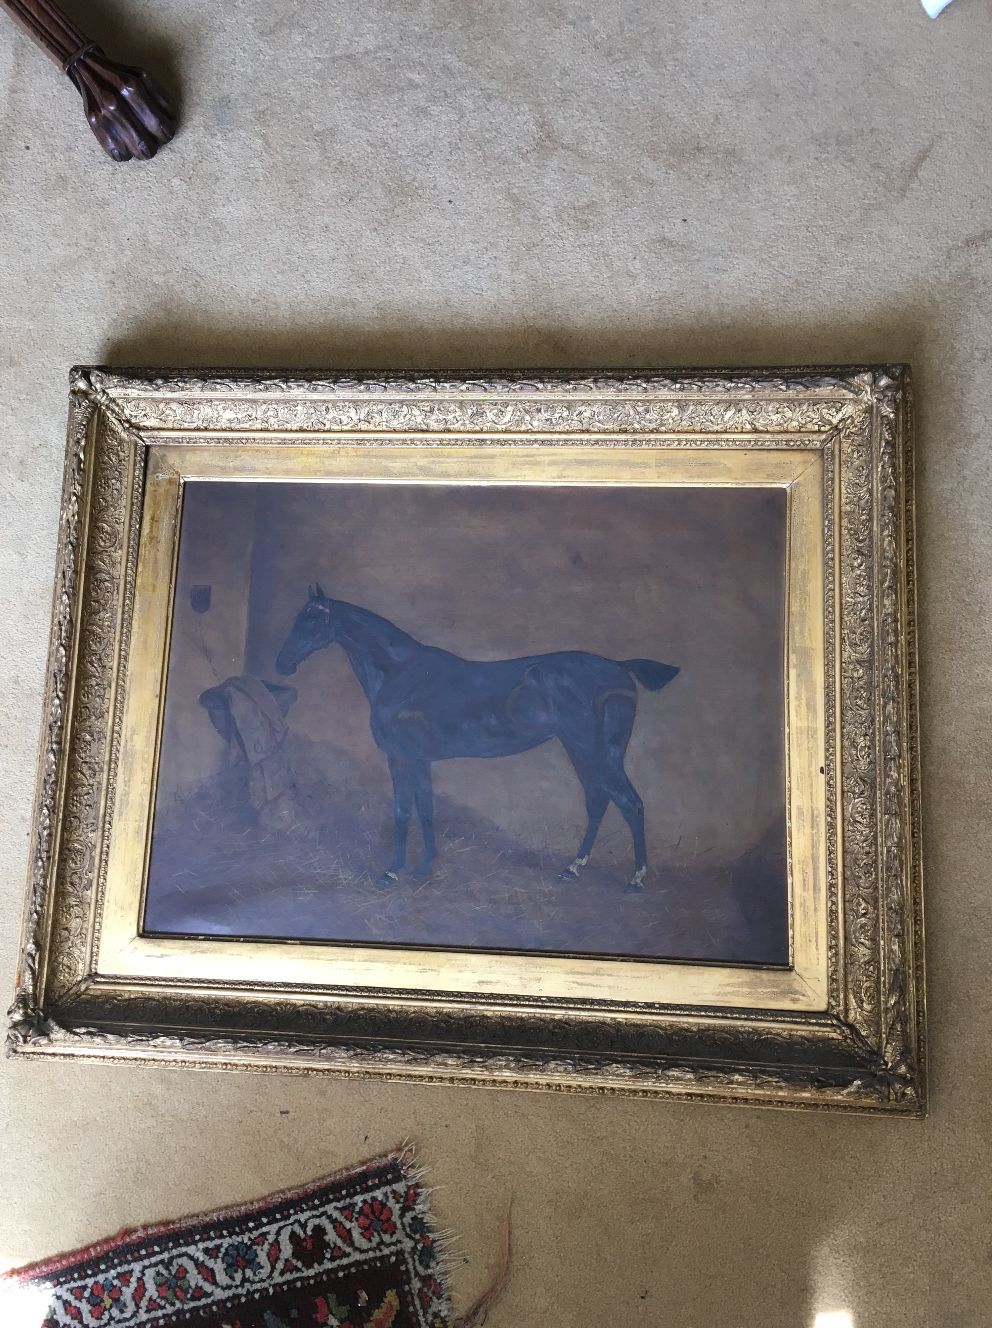 Horse portrait in stable by Callander Goldsmith 1880-1910 signed and dated 1881 lower left (CAL on